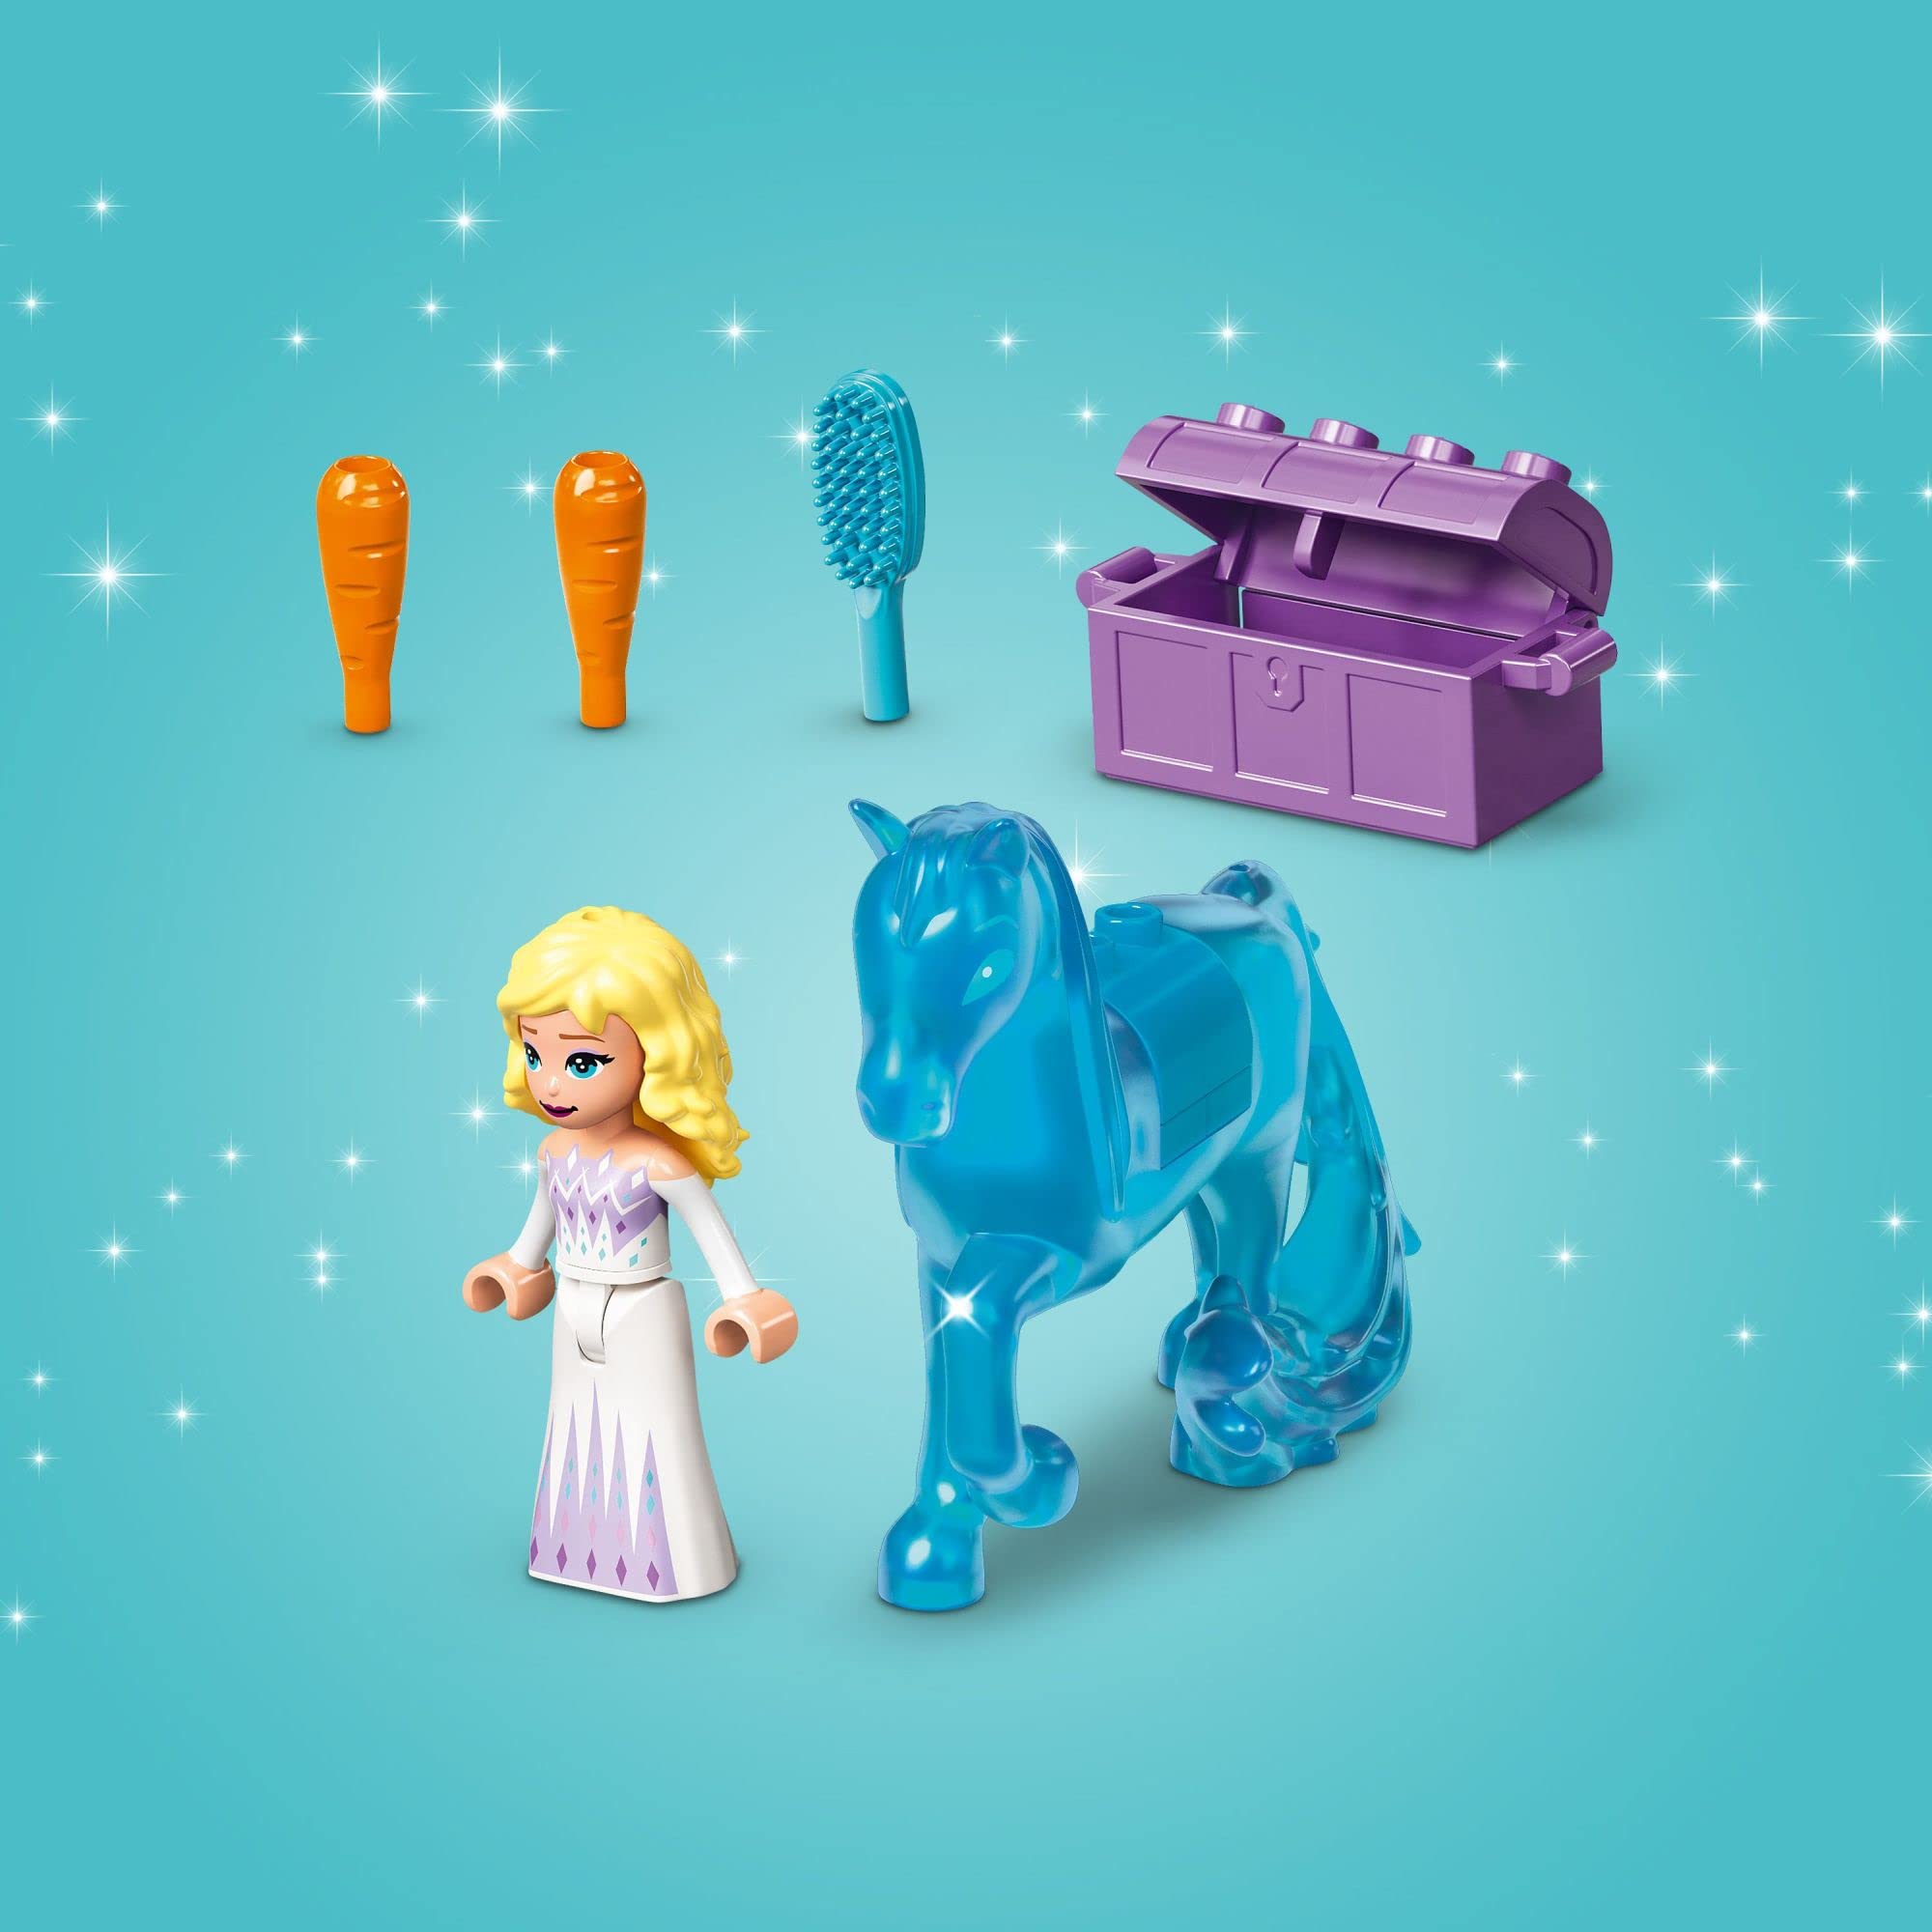 LEGO Disney Princess Elsa and The Nokk’s Ice Stable 43209 Set, with Buildable Frozen Toy Horse Figure for Kids Age 4 Plus and Mini-Doll, Birthday Gift for Girls and Boys